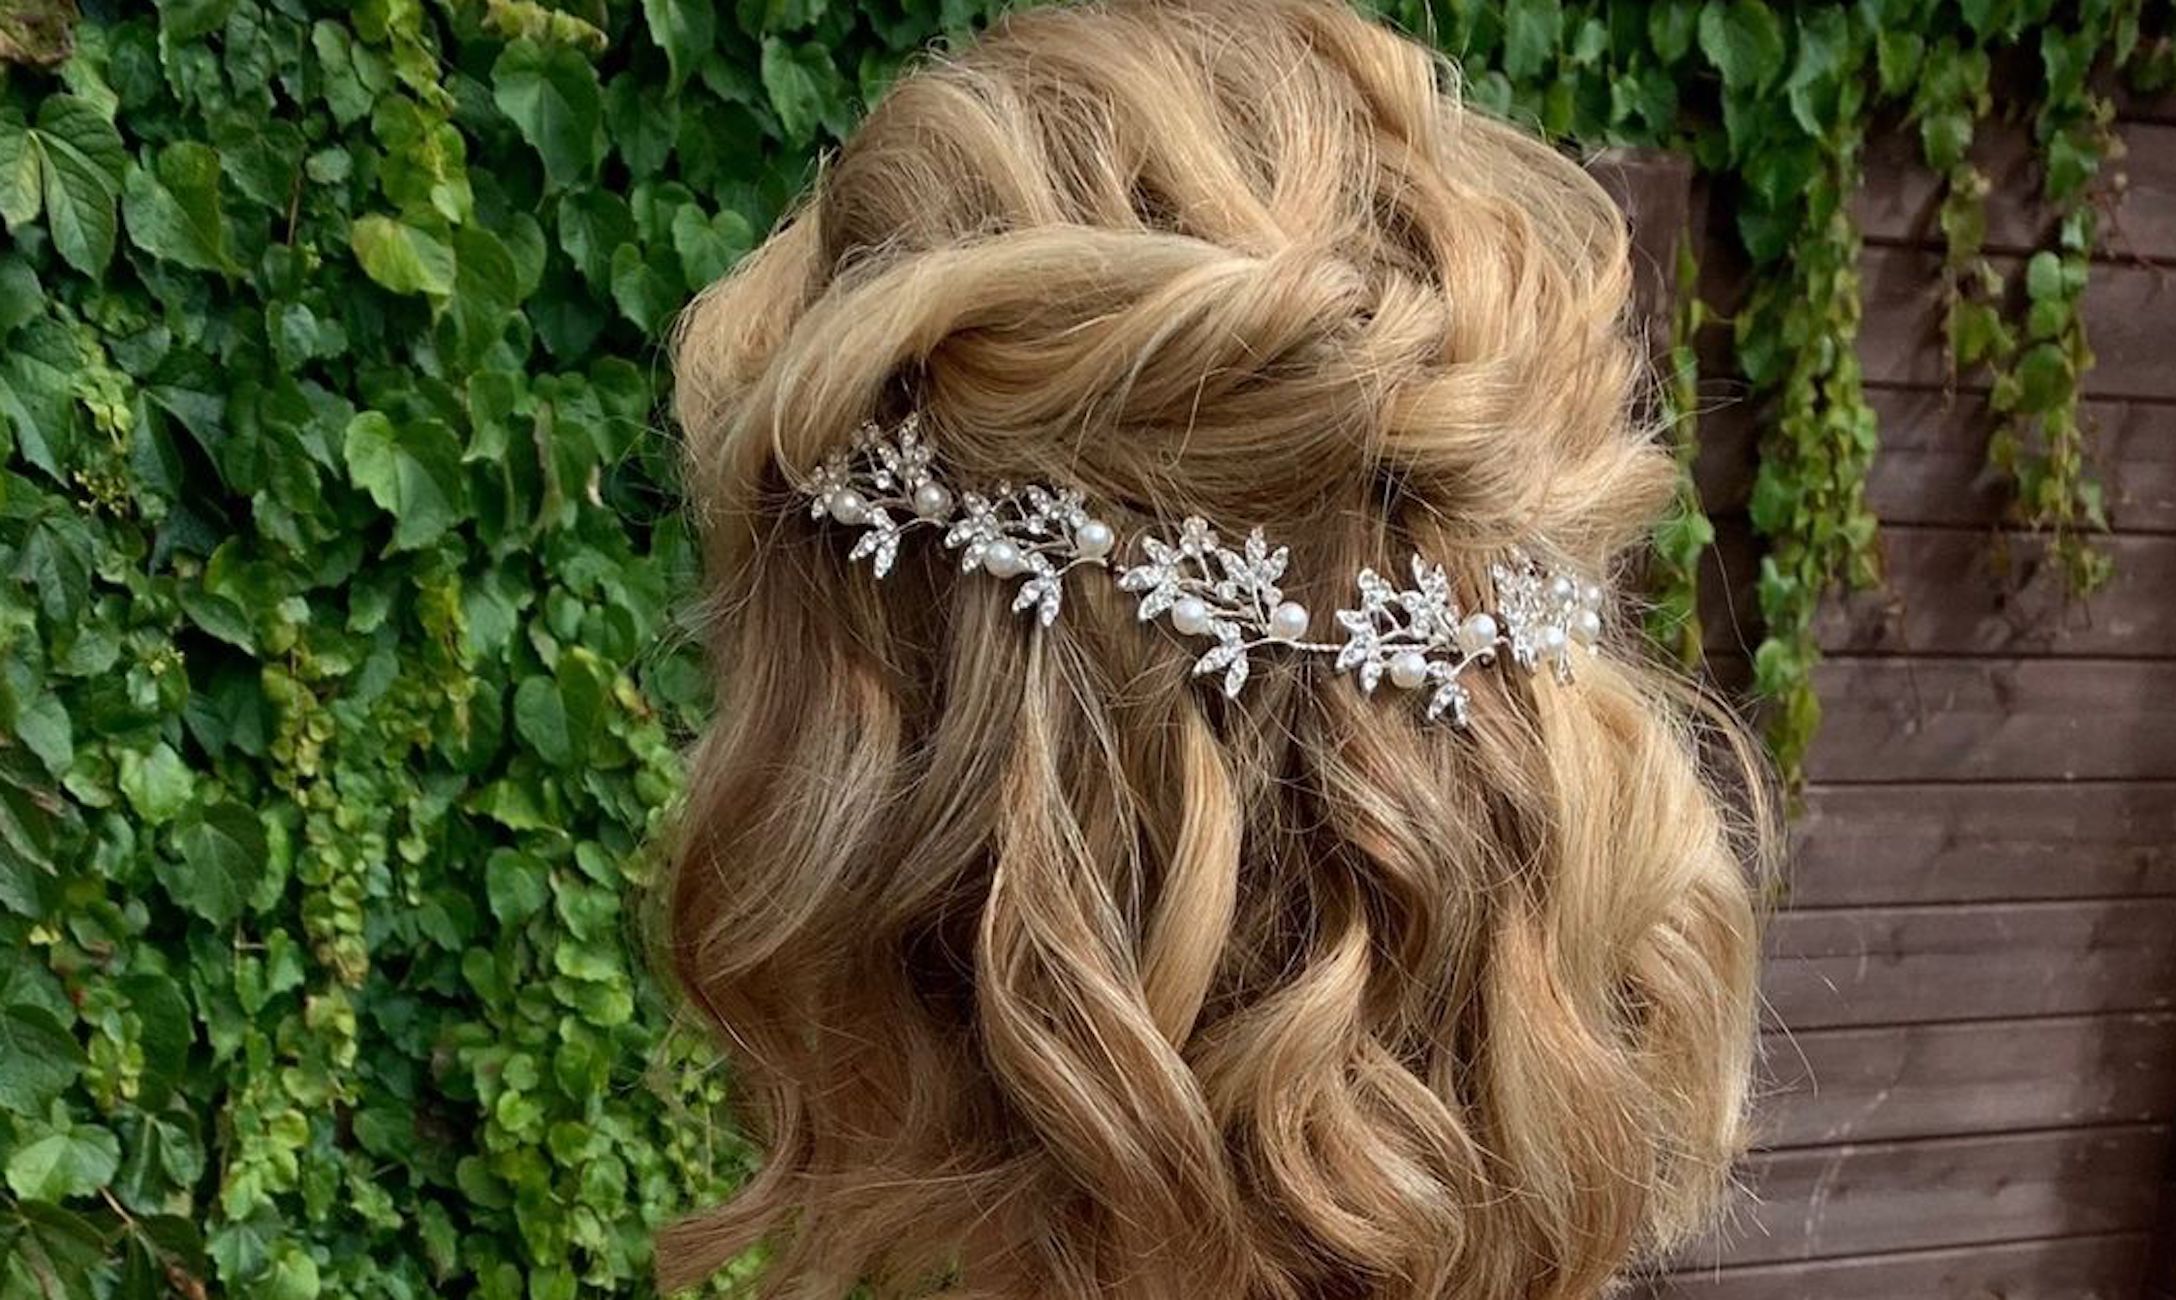 12 Disney Princess Wedding Hairstyles That Are Totally Regal